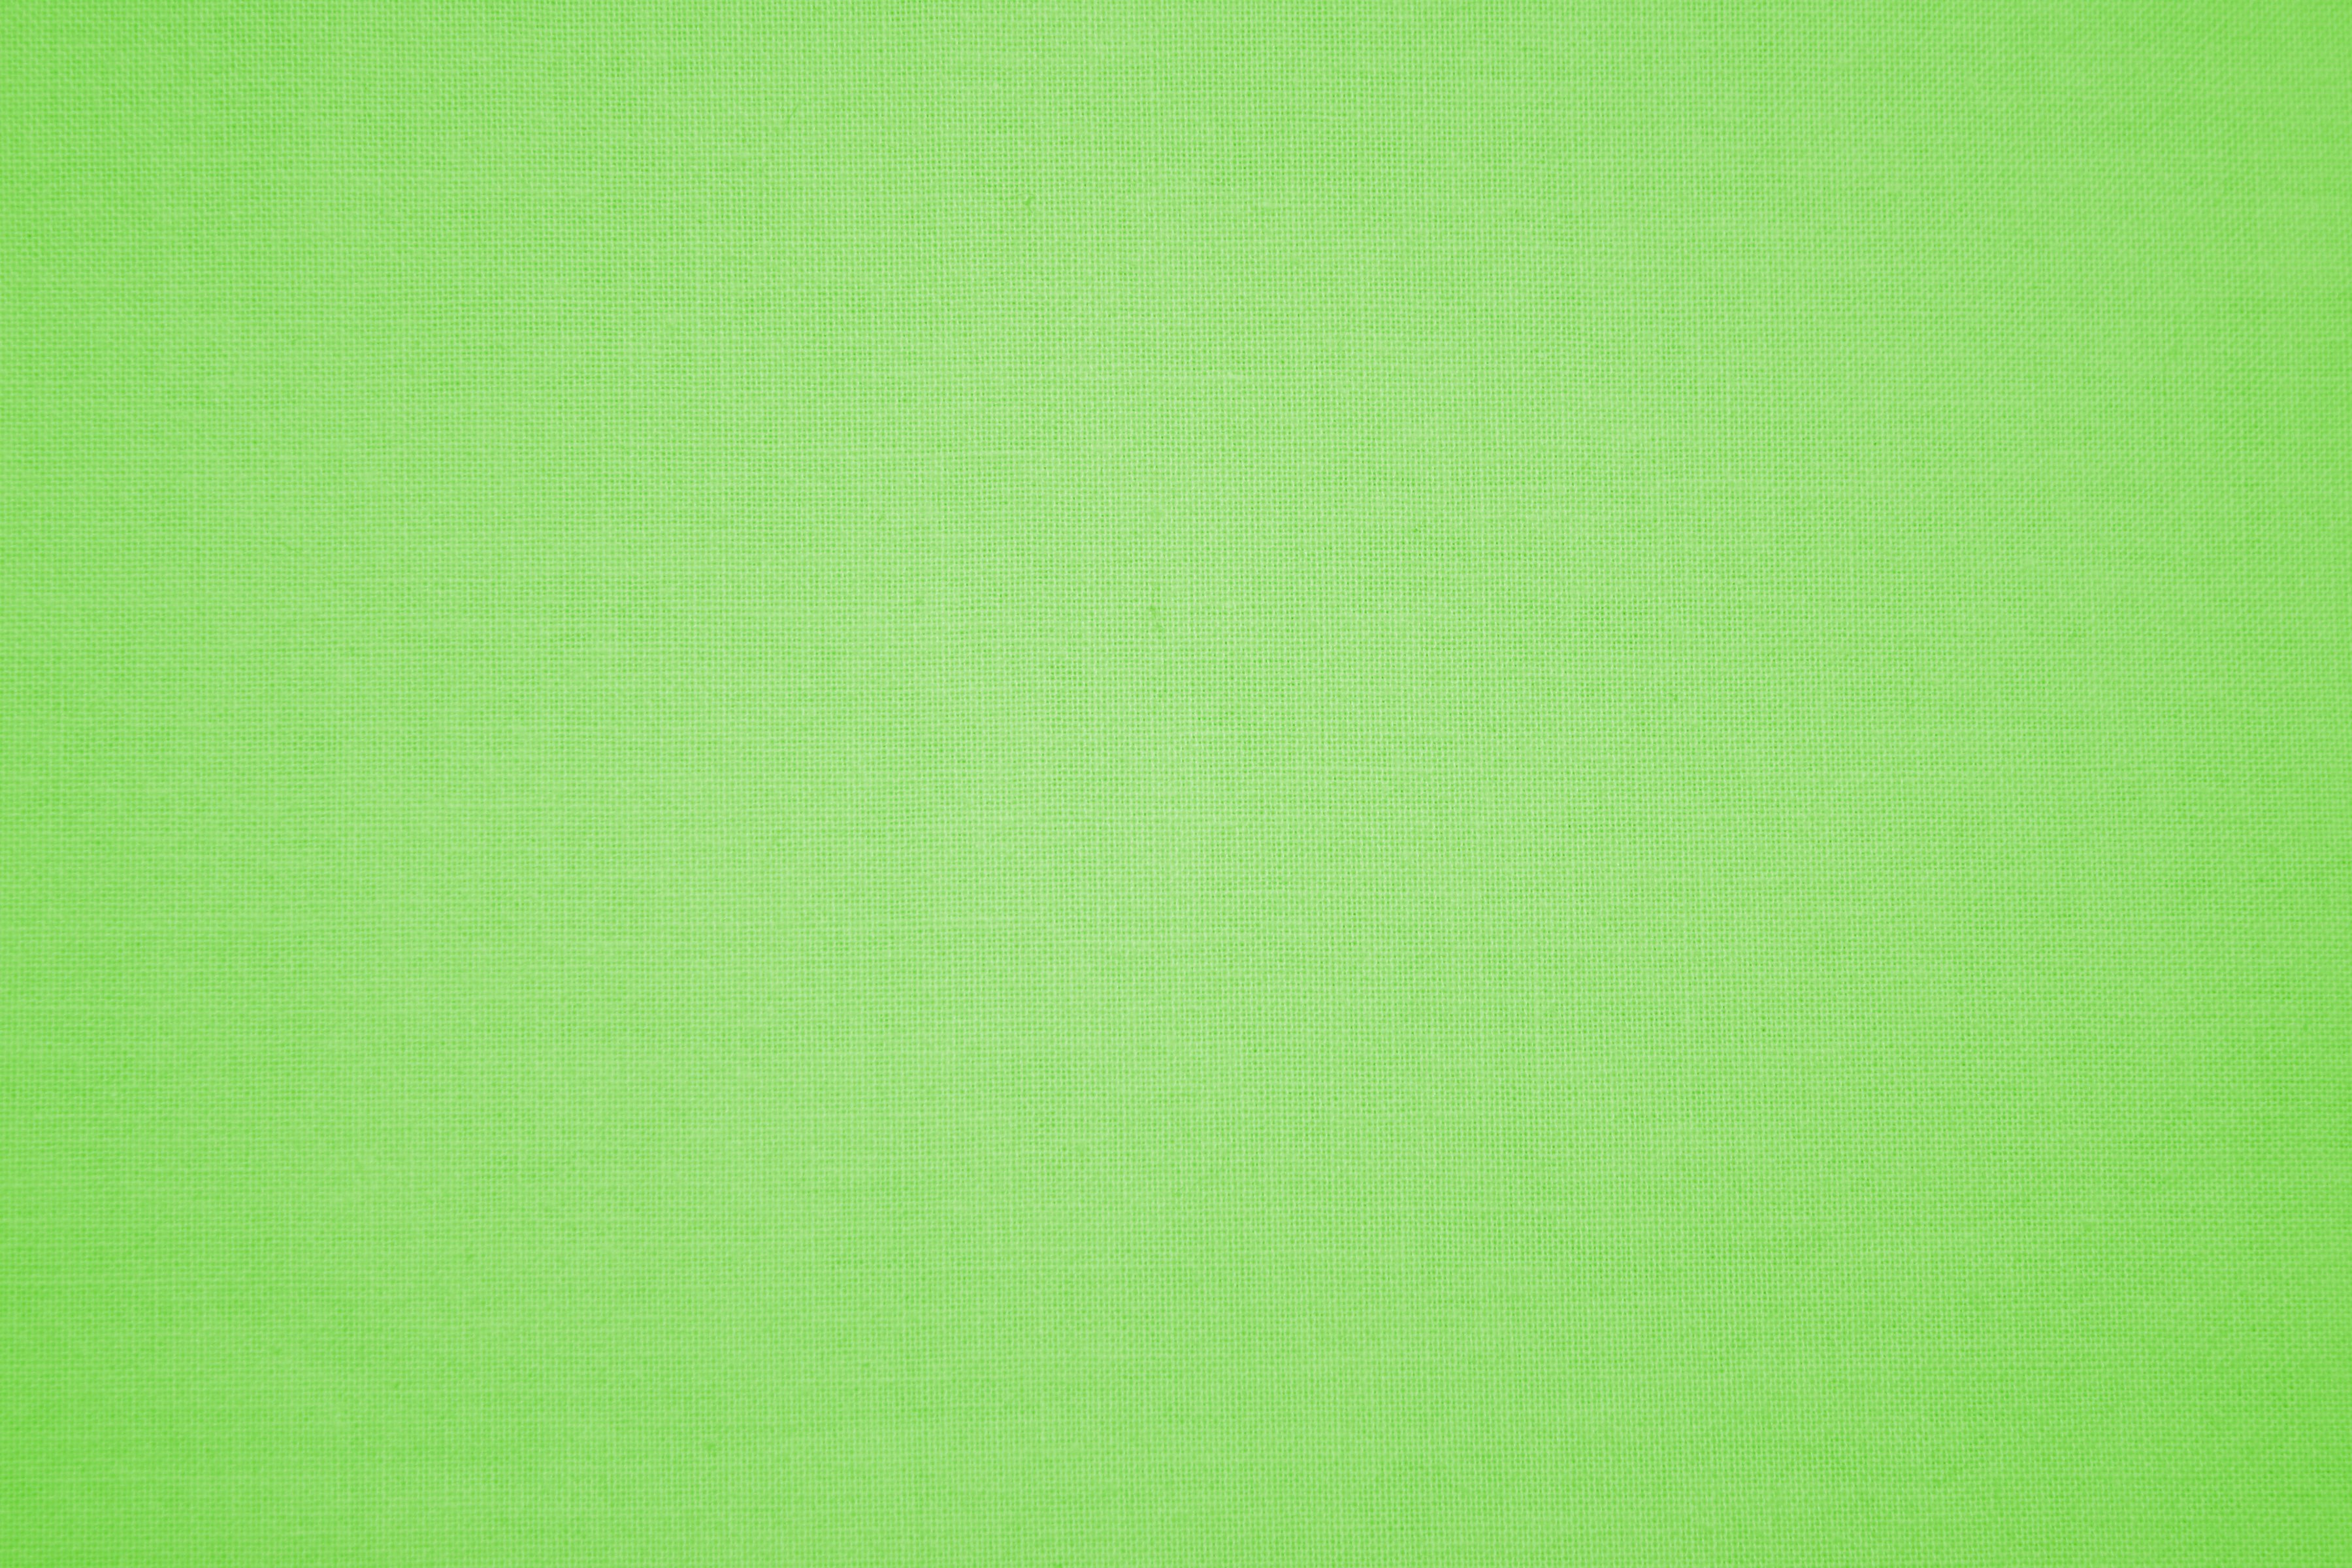 Lime Green Canvas Fabric Texture Picture Free Photograph Photos